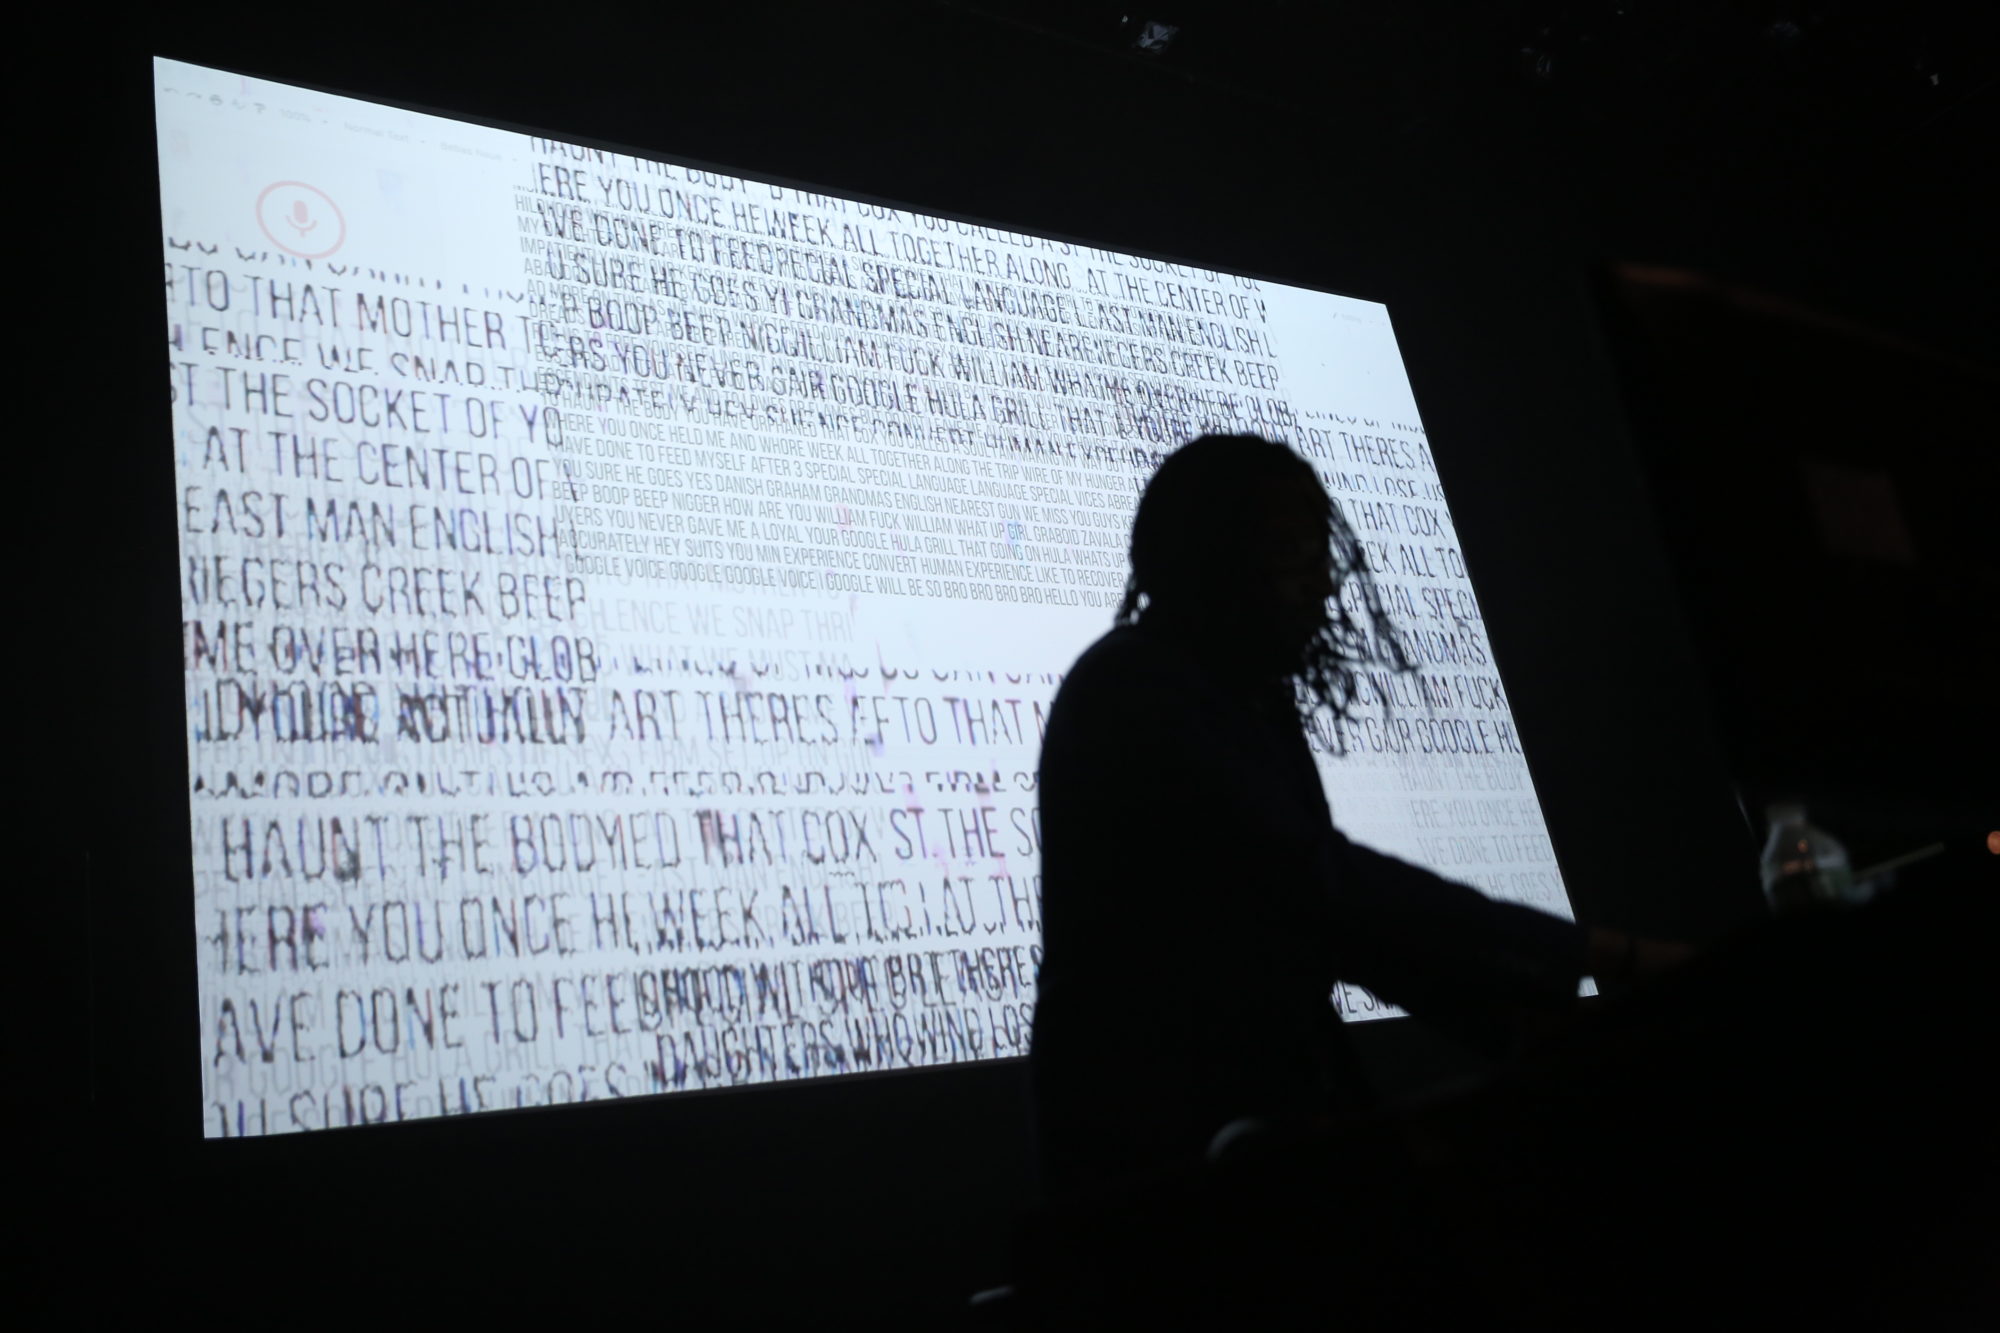 Silhouette of person in front of projection of text.